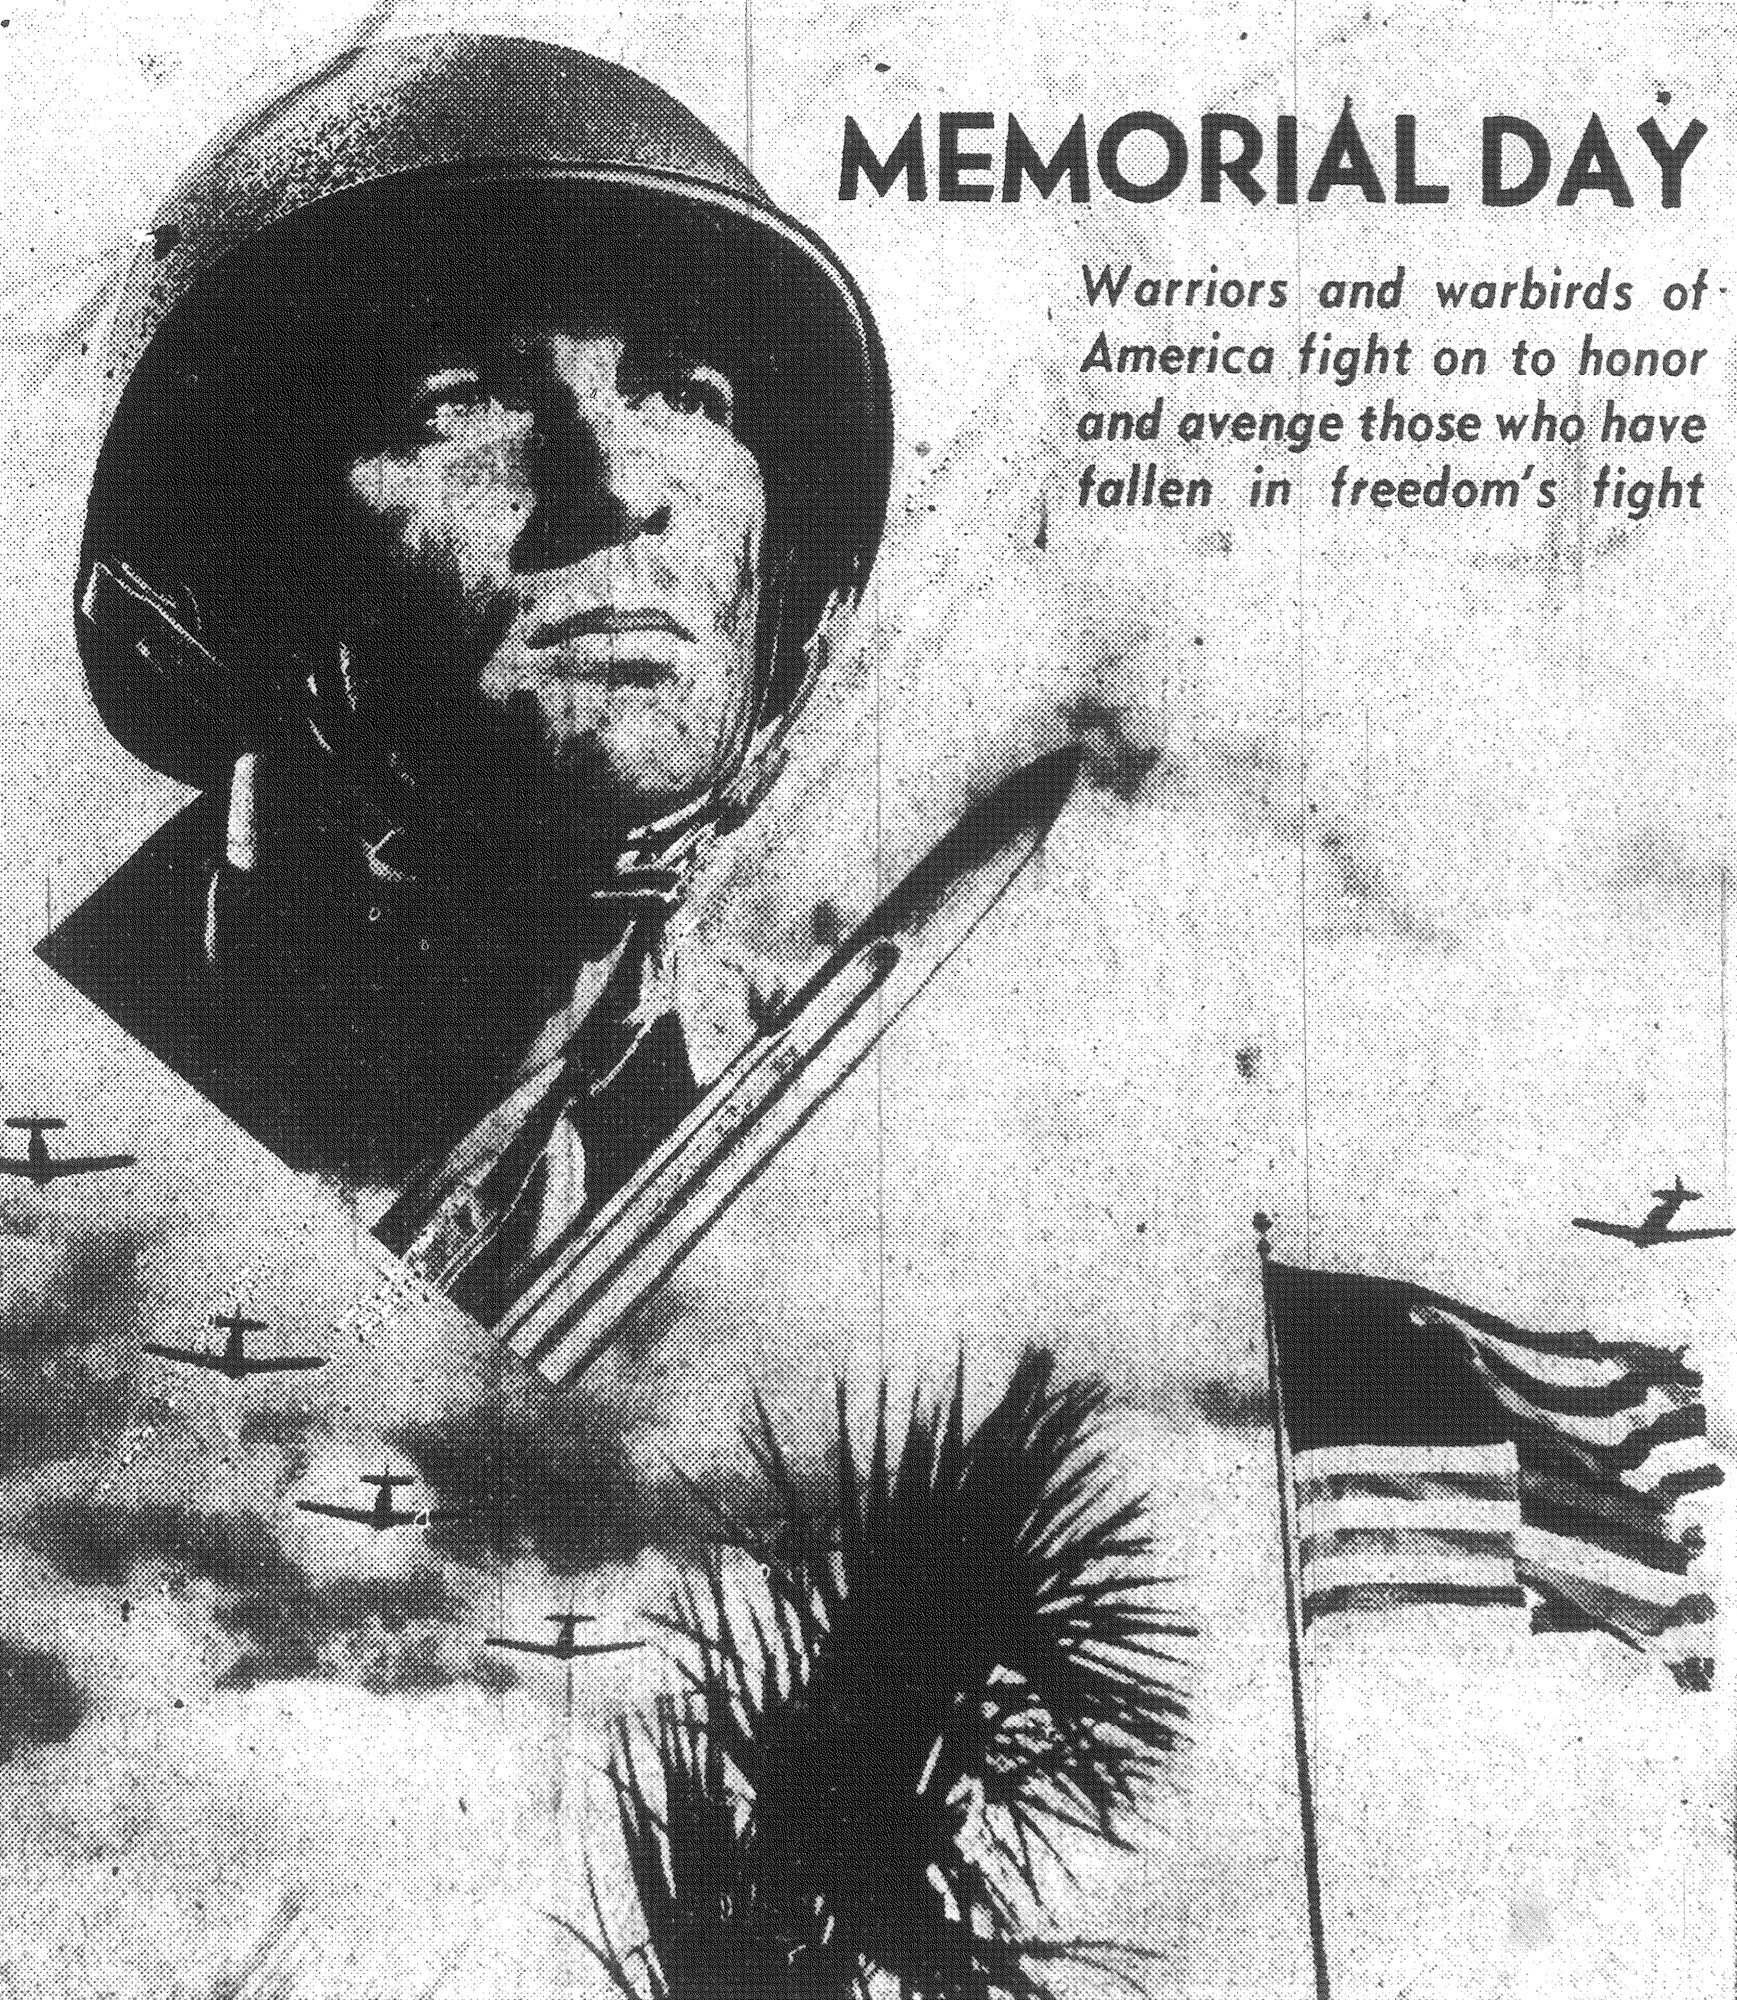 This poster appeared in 1943 in The Sumter Item honoring those who have made the ultimate sacrifice for their country.